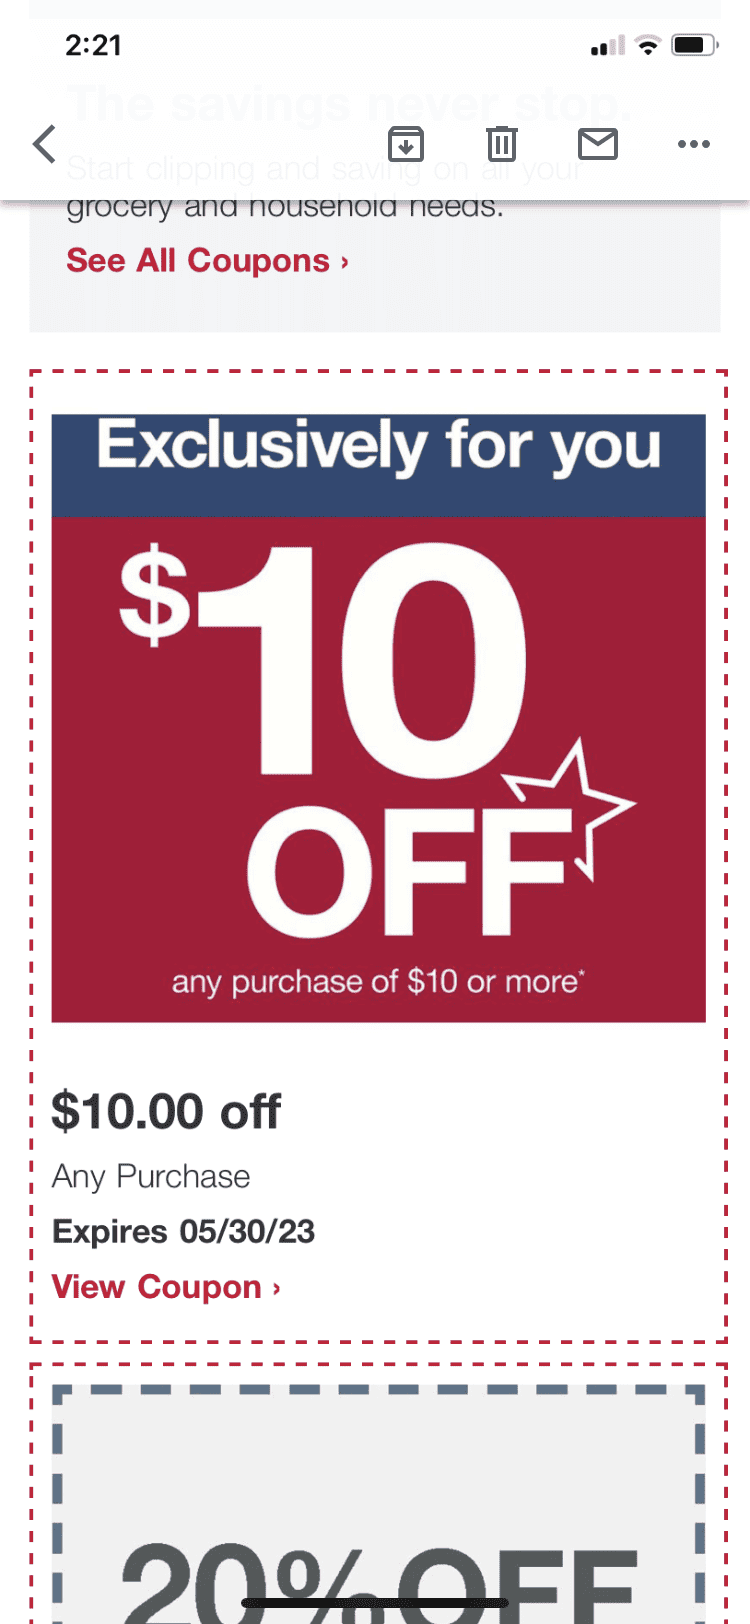 BJ’s New Exclusive for You Coupons Out!